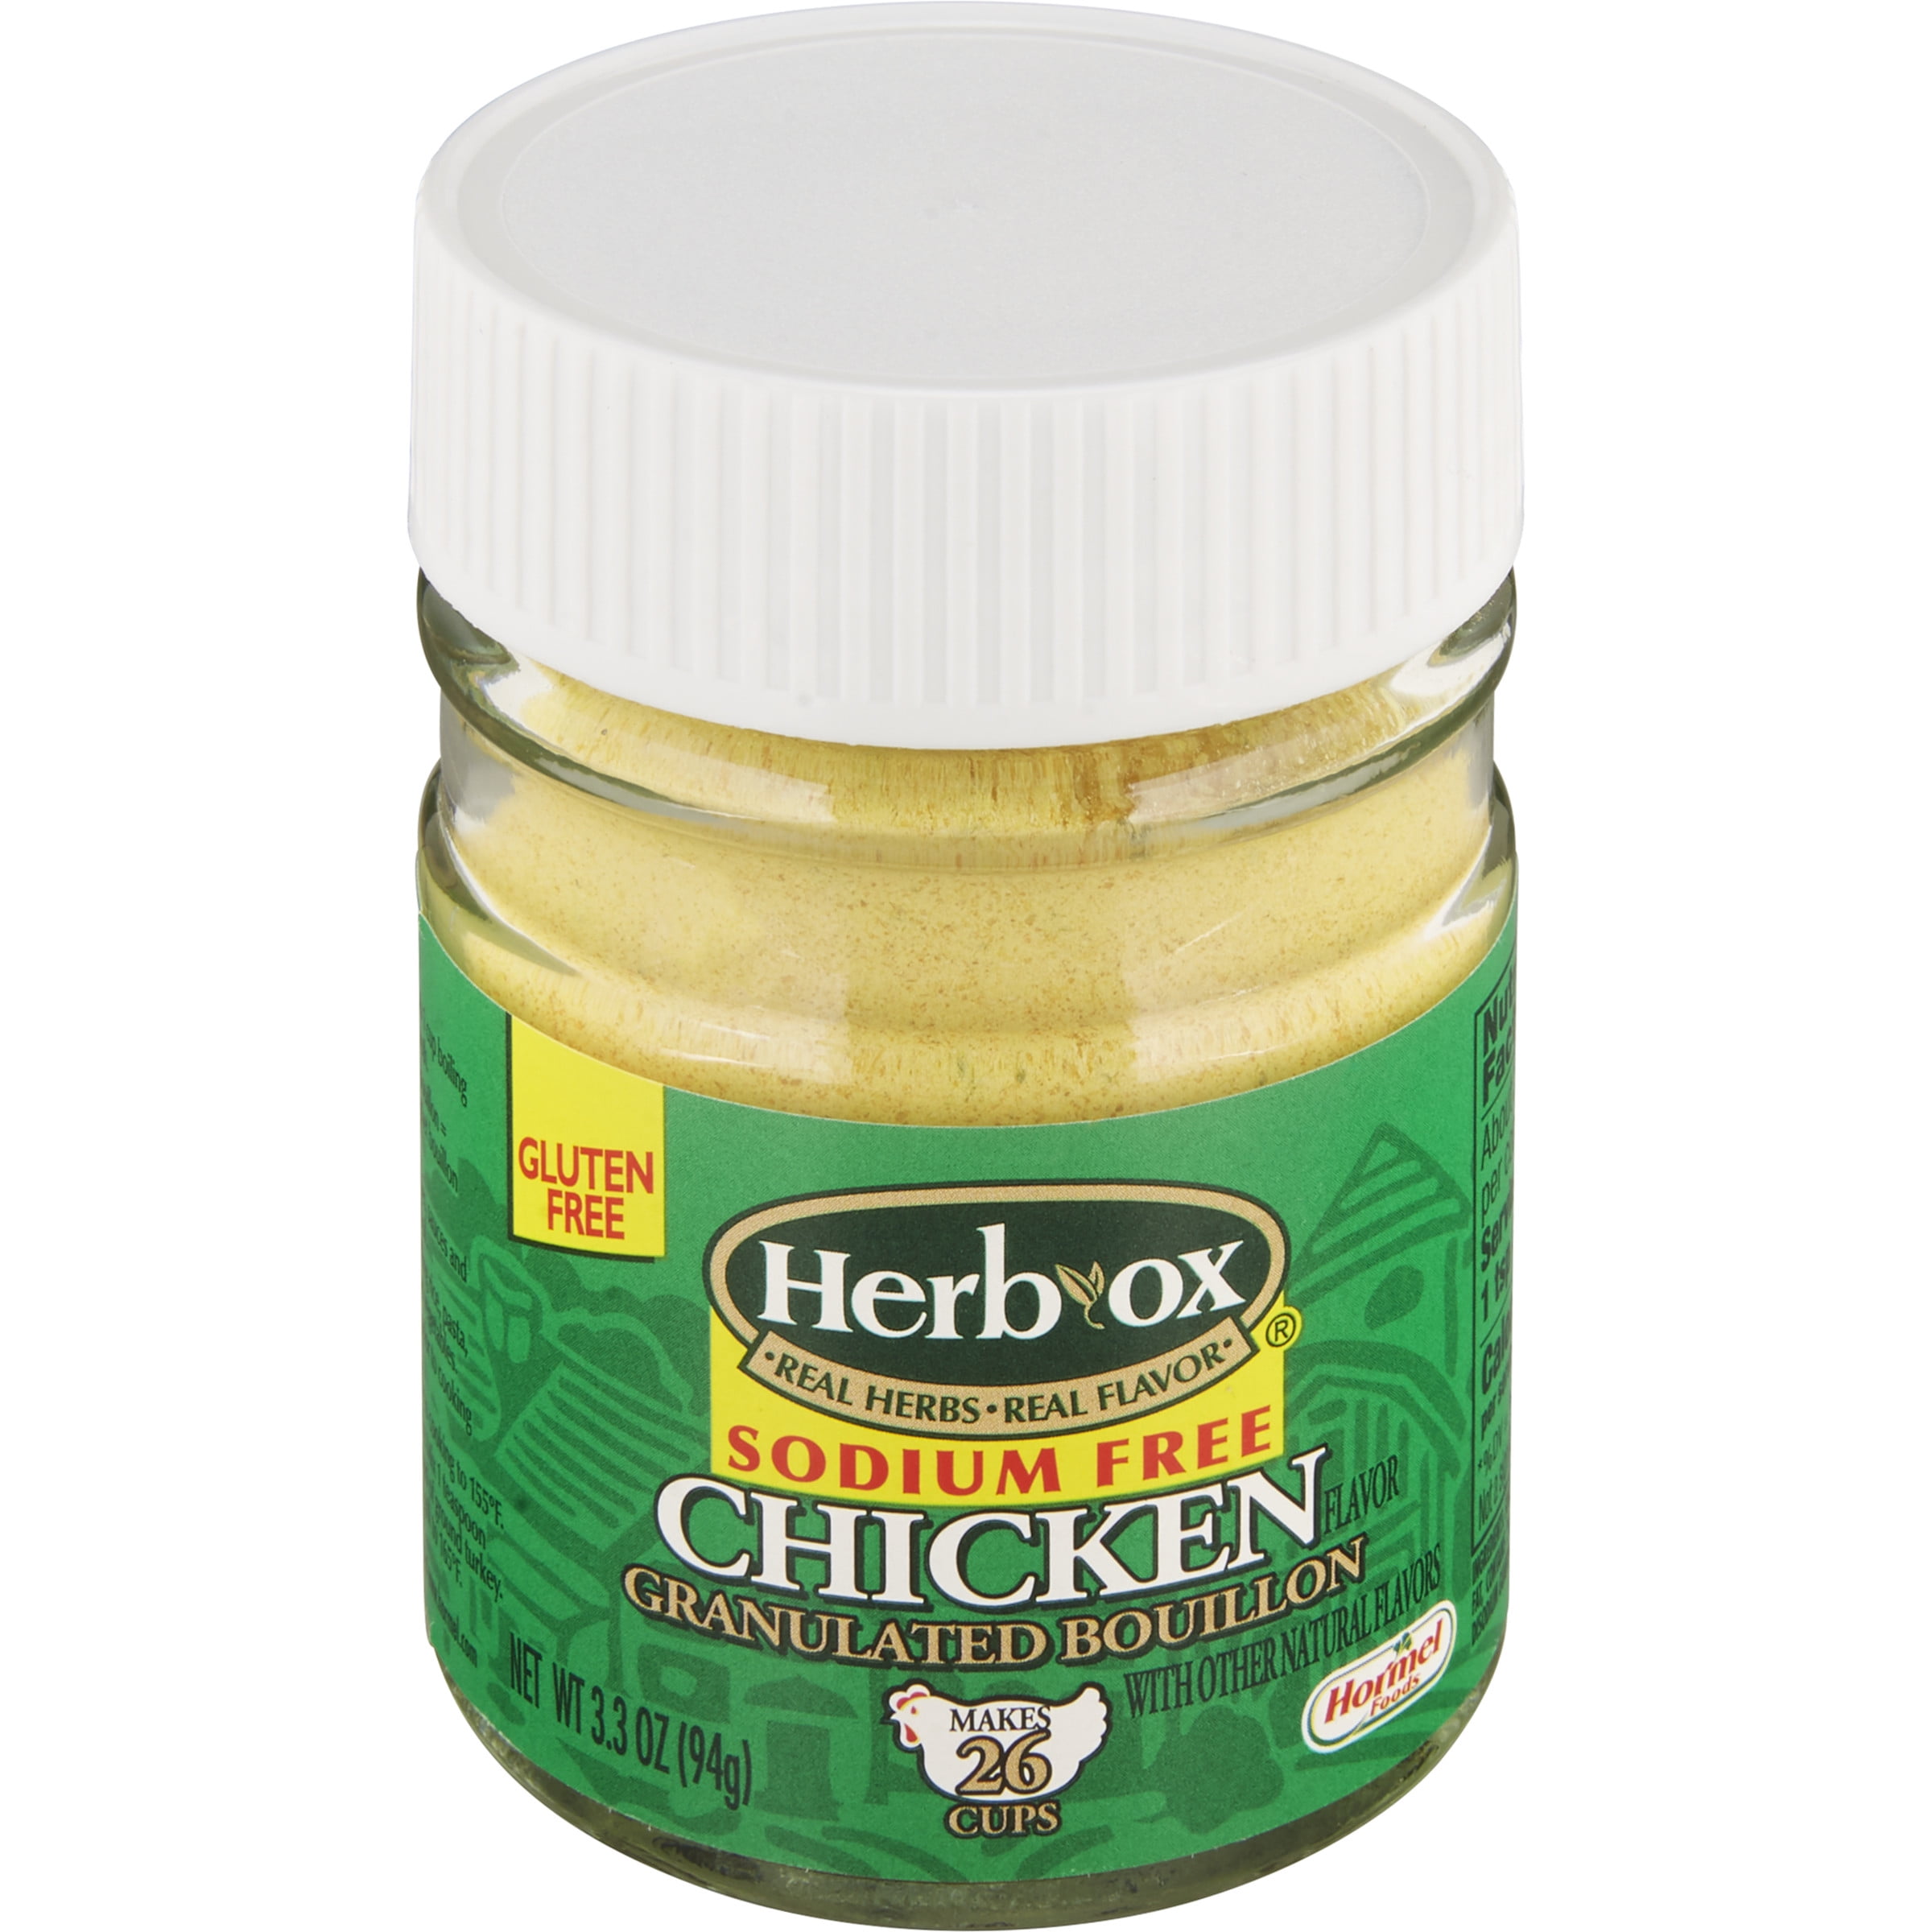 Knorr Reduced Sodium Chicken Granulated Bouillon, 7.9 oz - Fry's